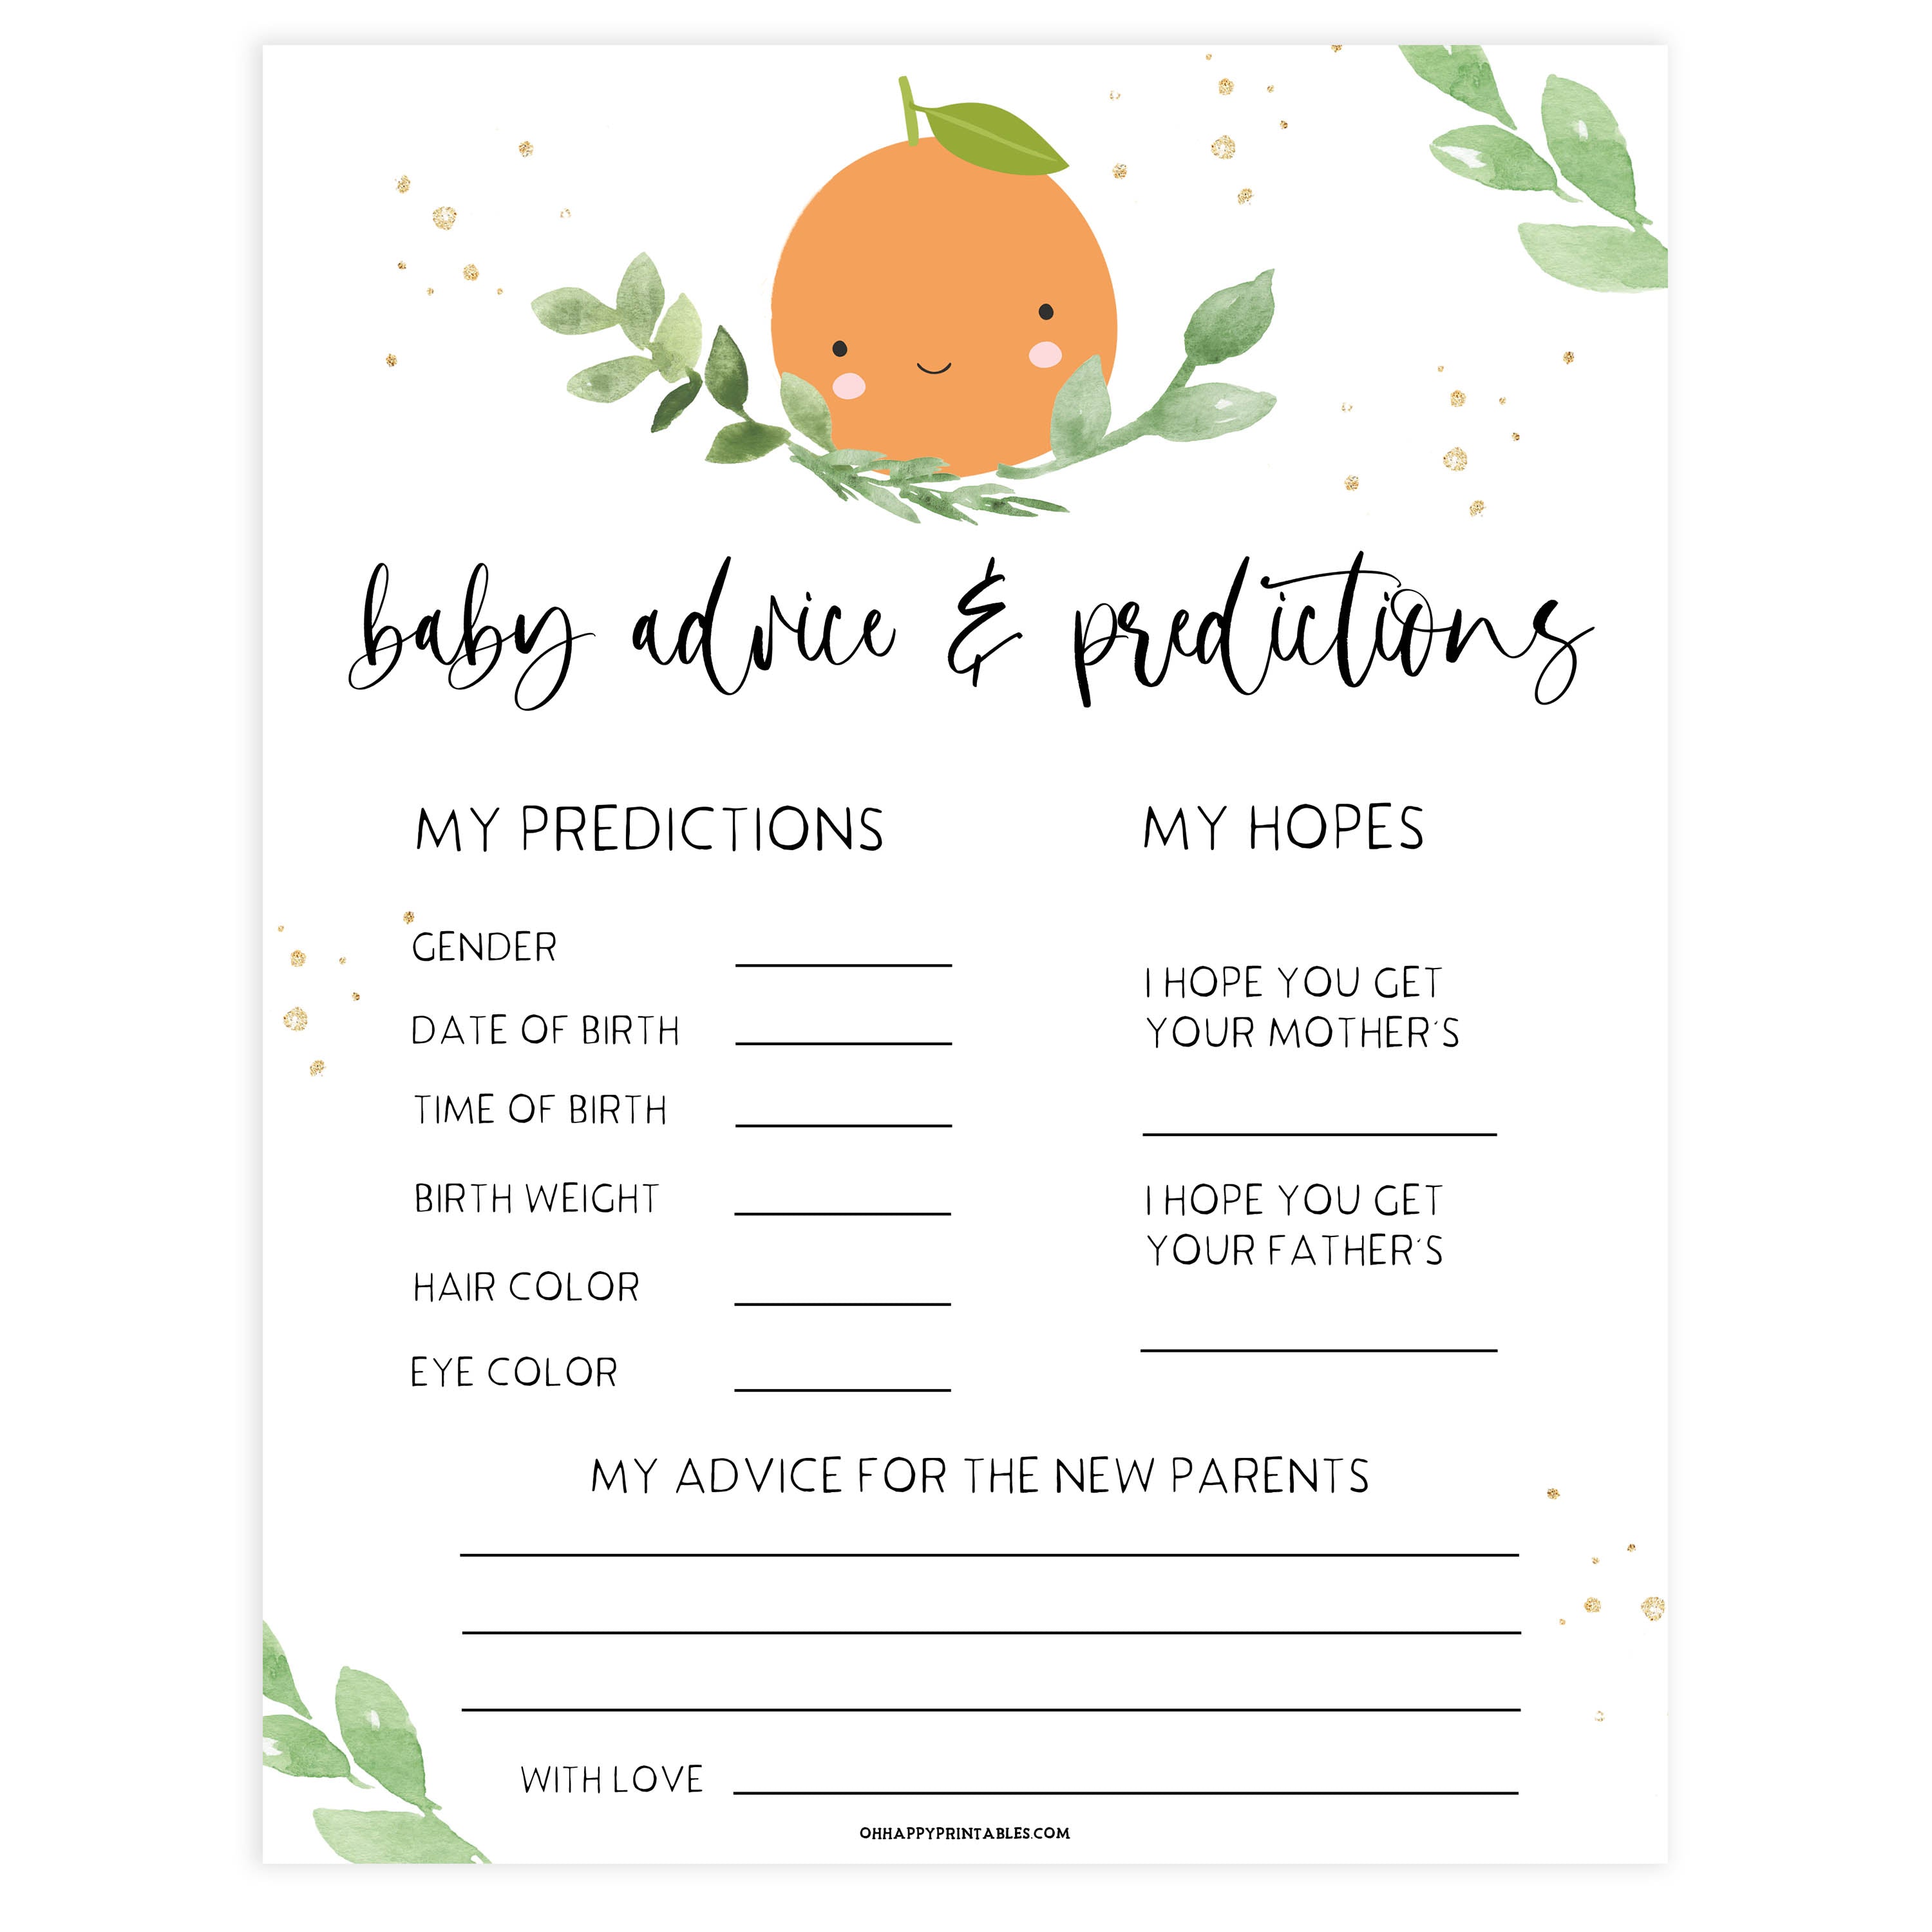 baby advice and predictions game, Printable baby shower games, little cutie baby games, baby shower games, fun baby shower ideas, top baby shower ideas, little cutie baby shower, baby shower games, fun little cutie baby shower ideas